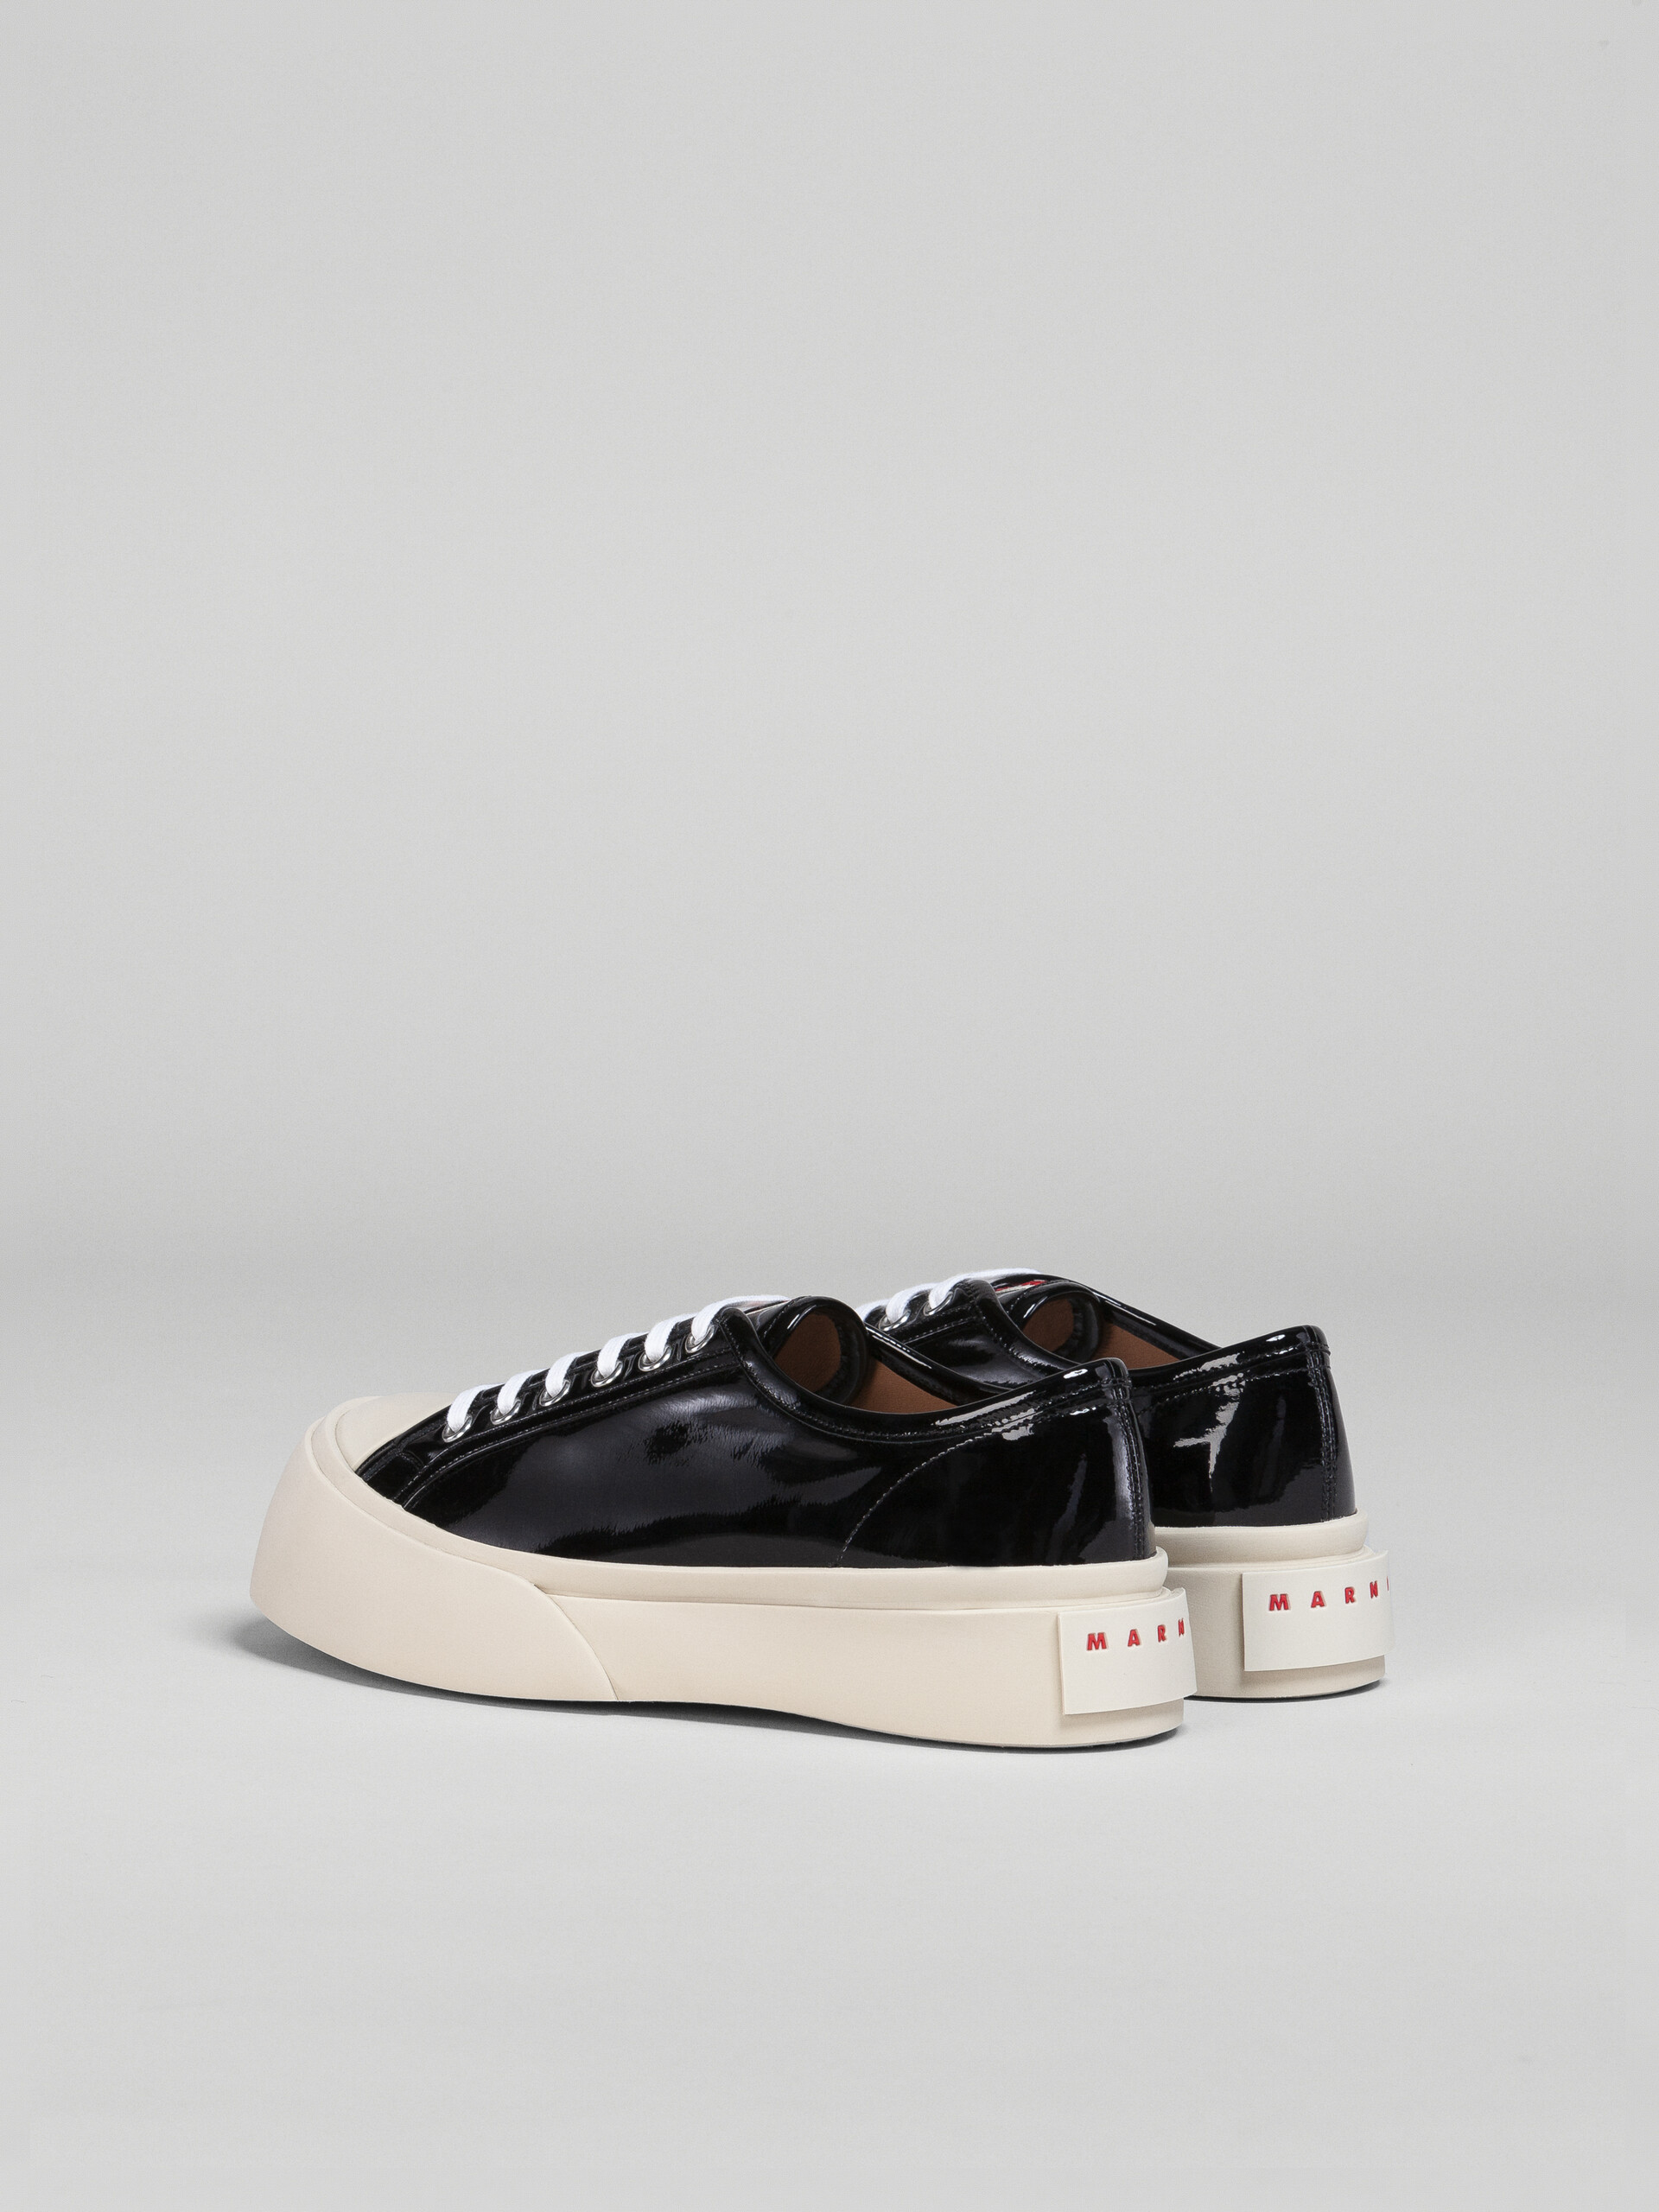 Patent leather PABLO lace-up sneaker - Sneakers - Image 3